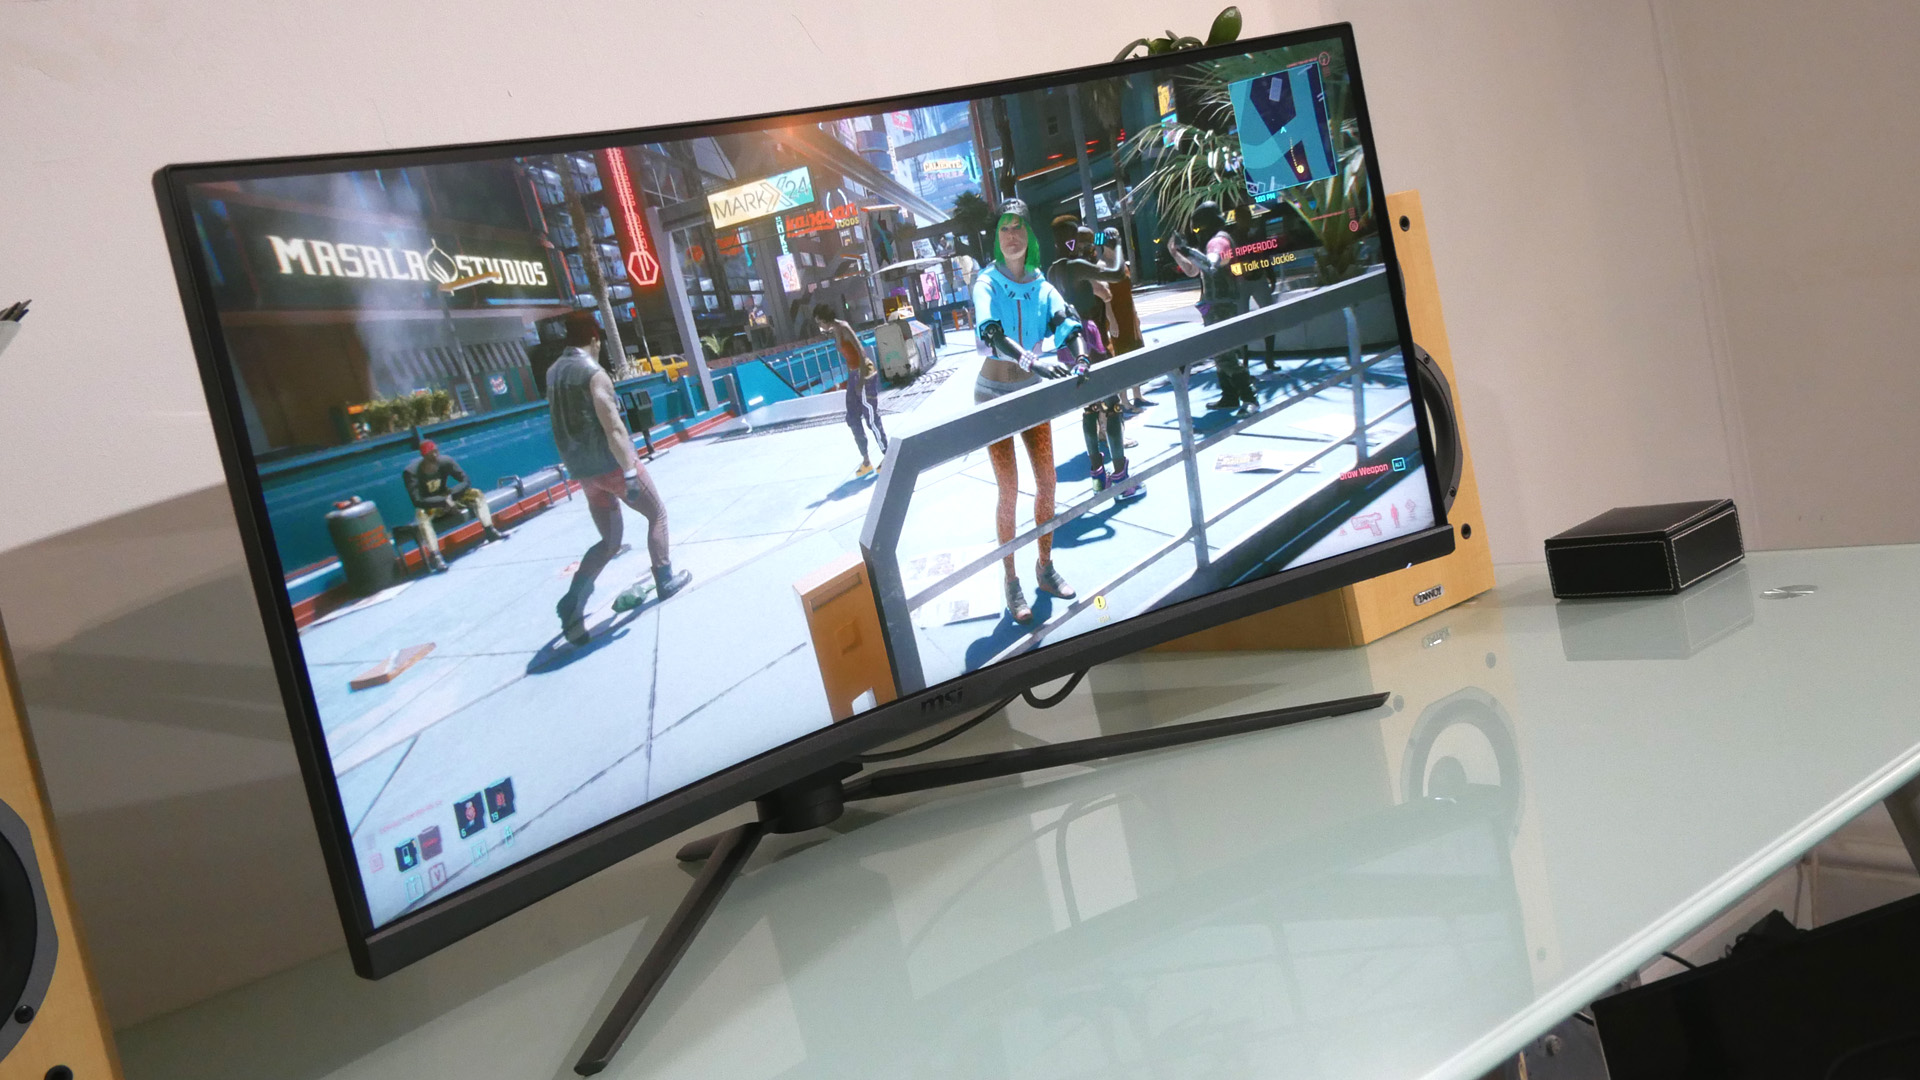 A display deathmatch - should you buy a gaming TV or gaming monitor?